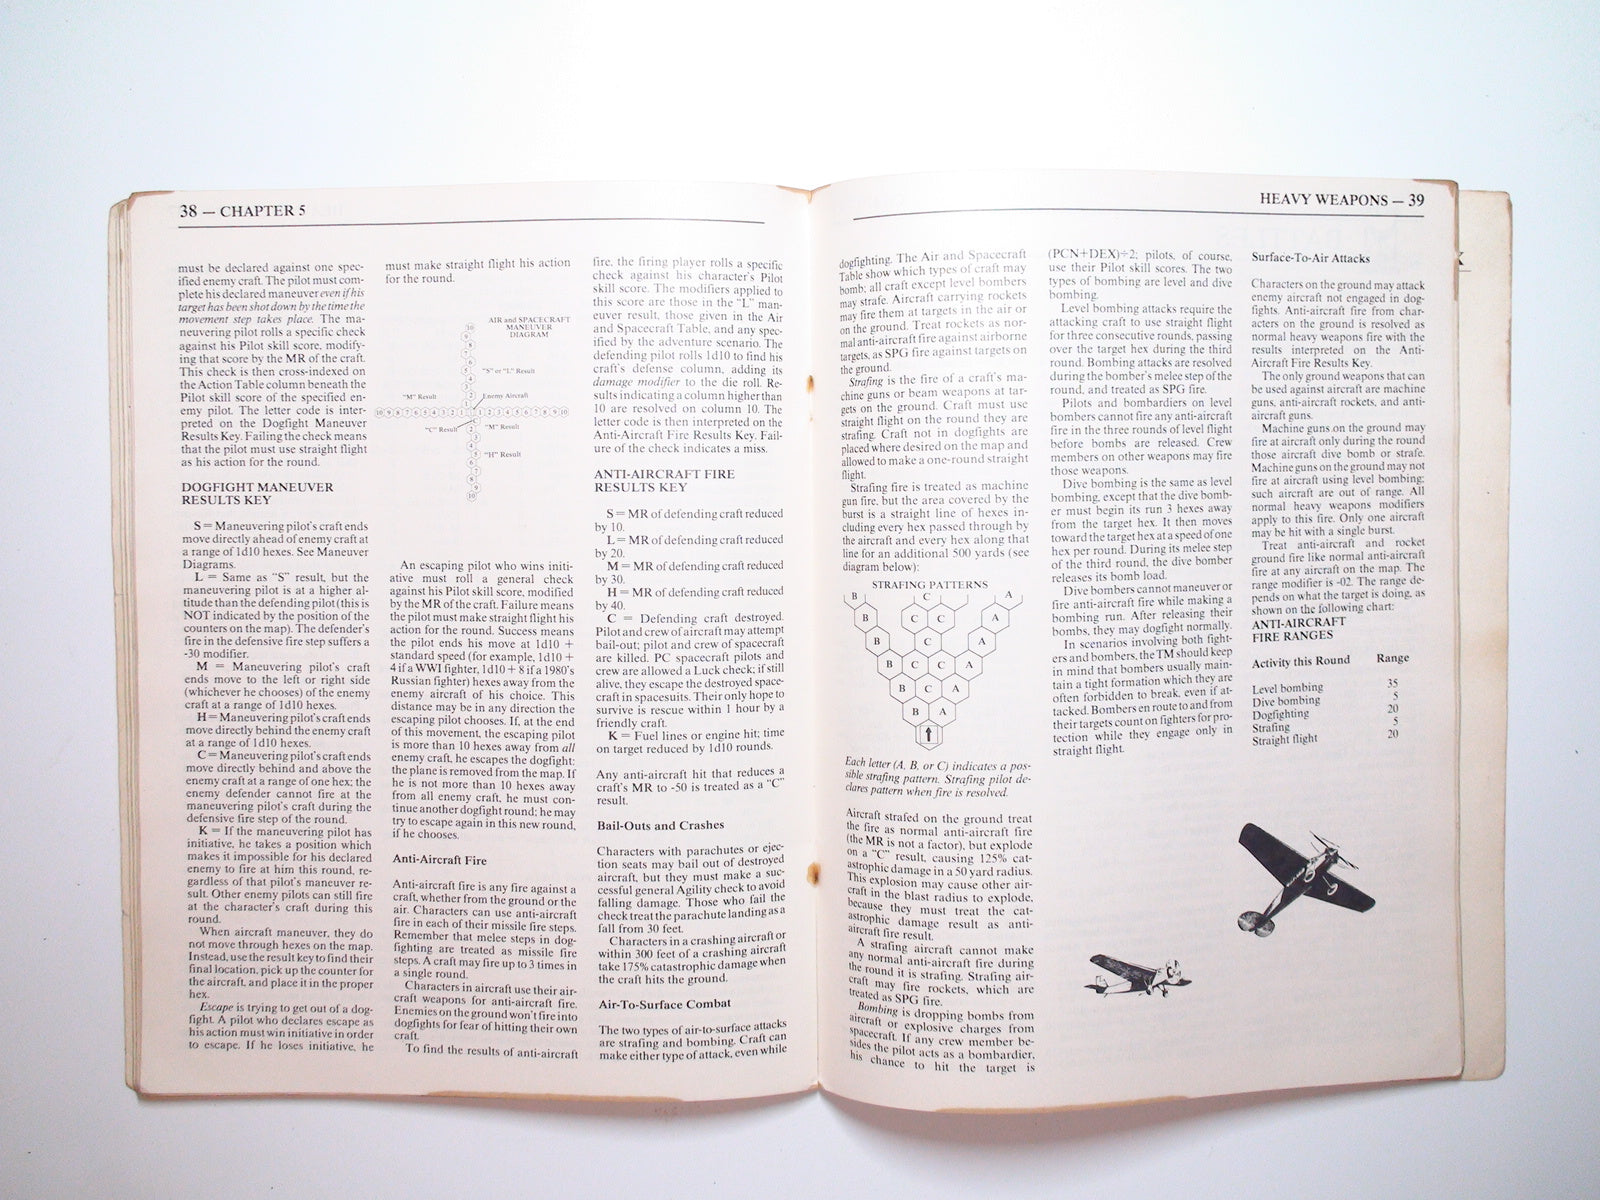 TimeMaster Guide to the Continuum, Travelers' Manual, Pacesetter RPG, 1984